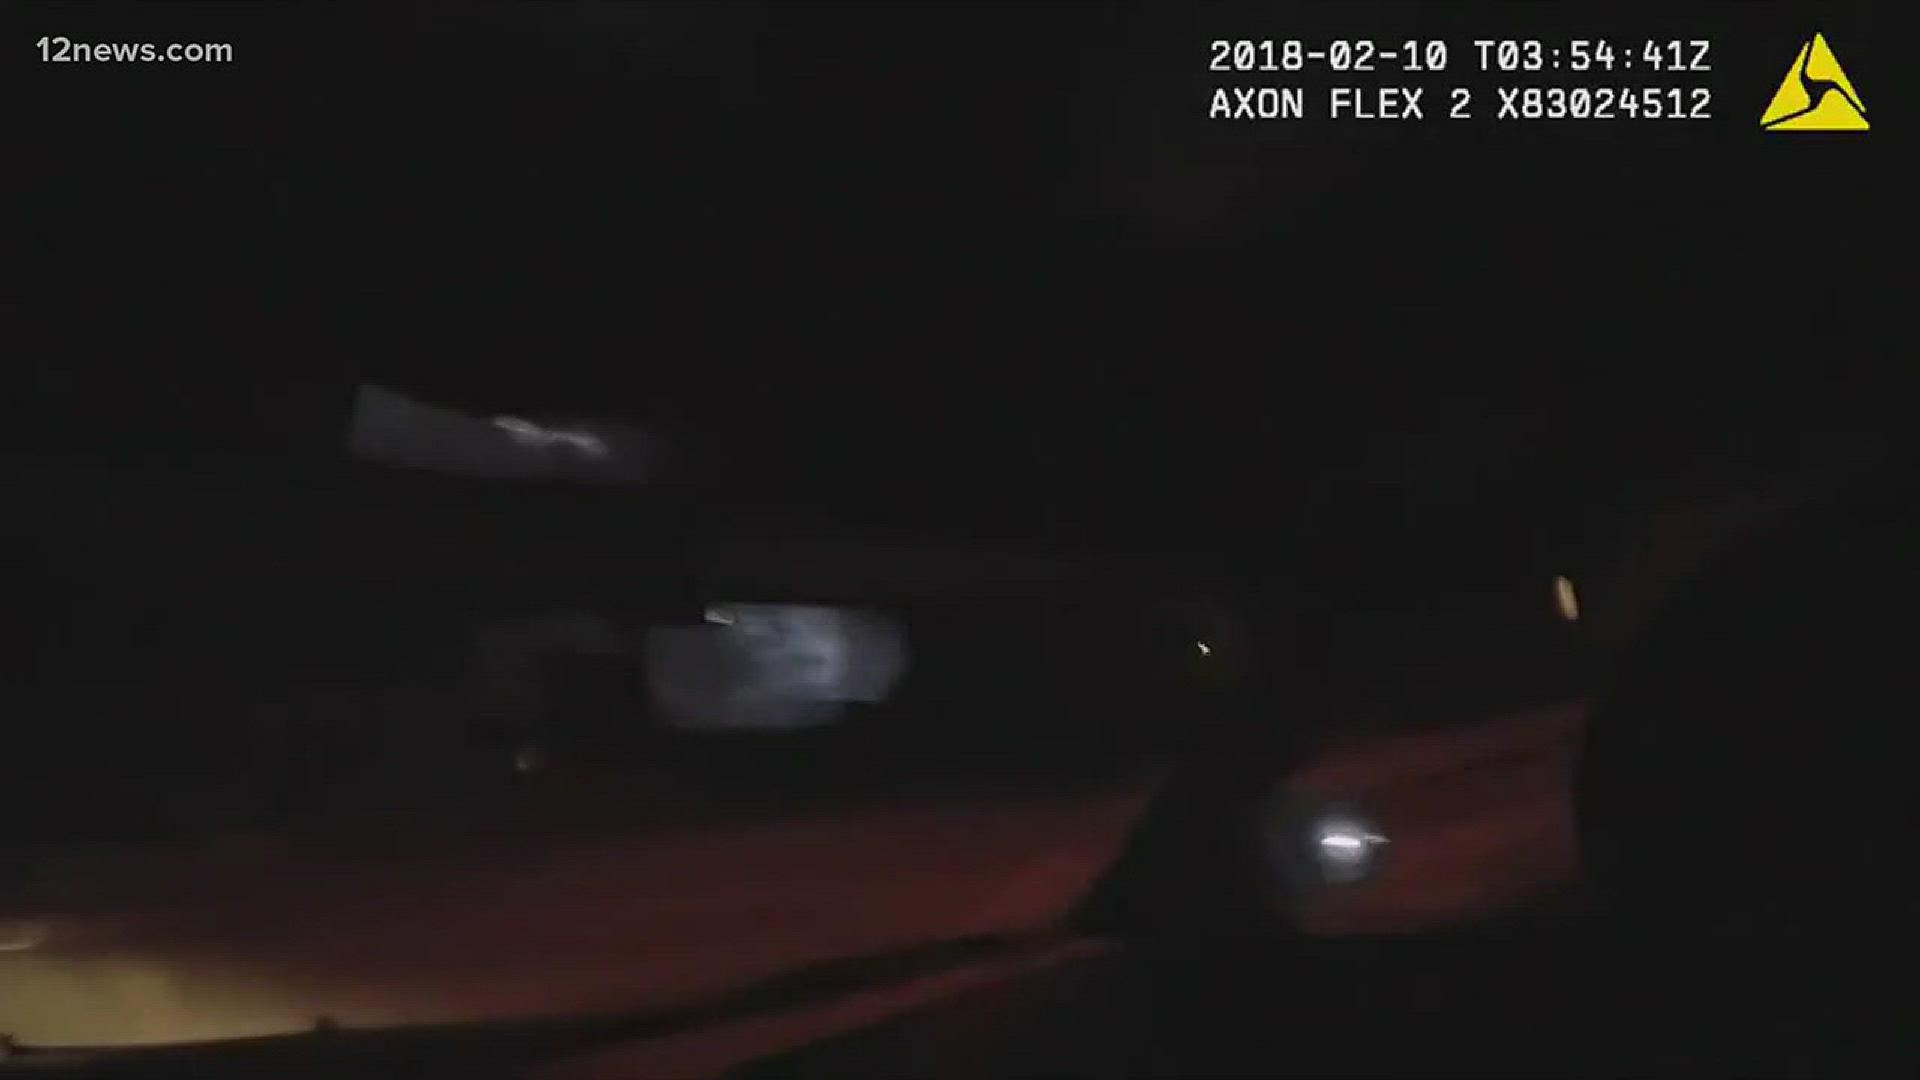 Flagstaff police have released body camera footage of an officer-involved shooting in which a man was killed last week. The footage shows a police officer repeatedly giving commands to the suspect before opening fire.